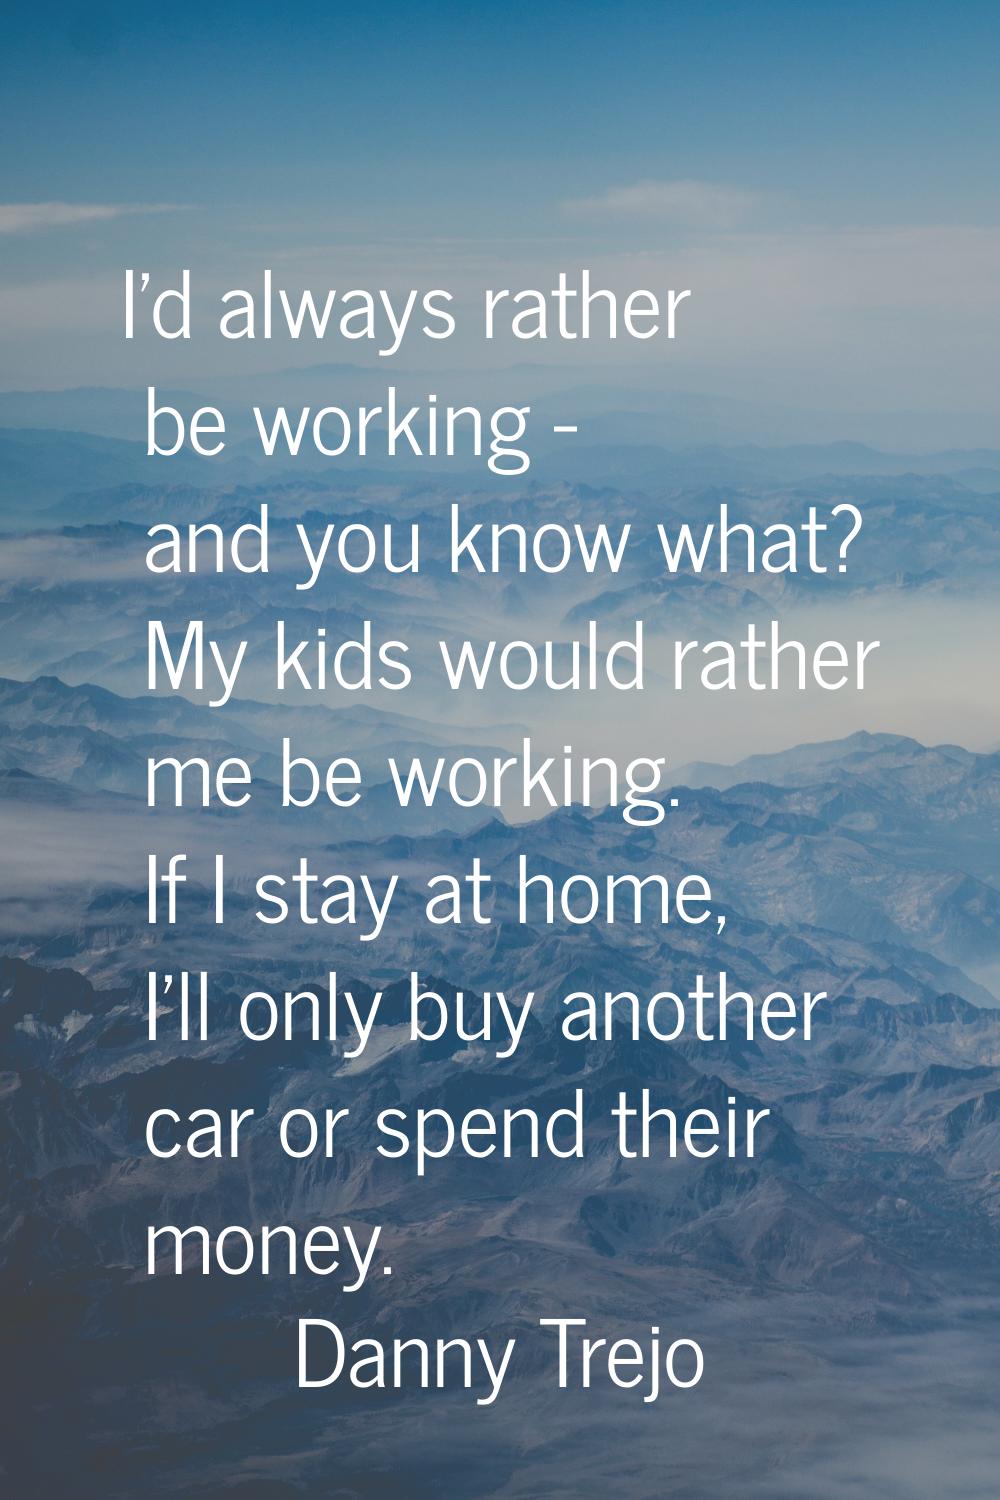 I'd always rather be working - and you know what? My kids would rather me be working. If I stay at 